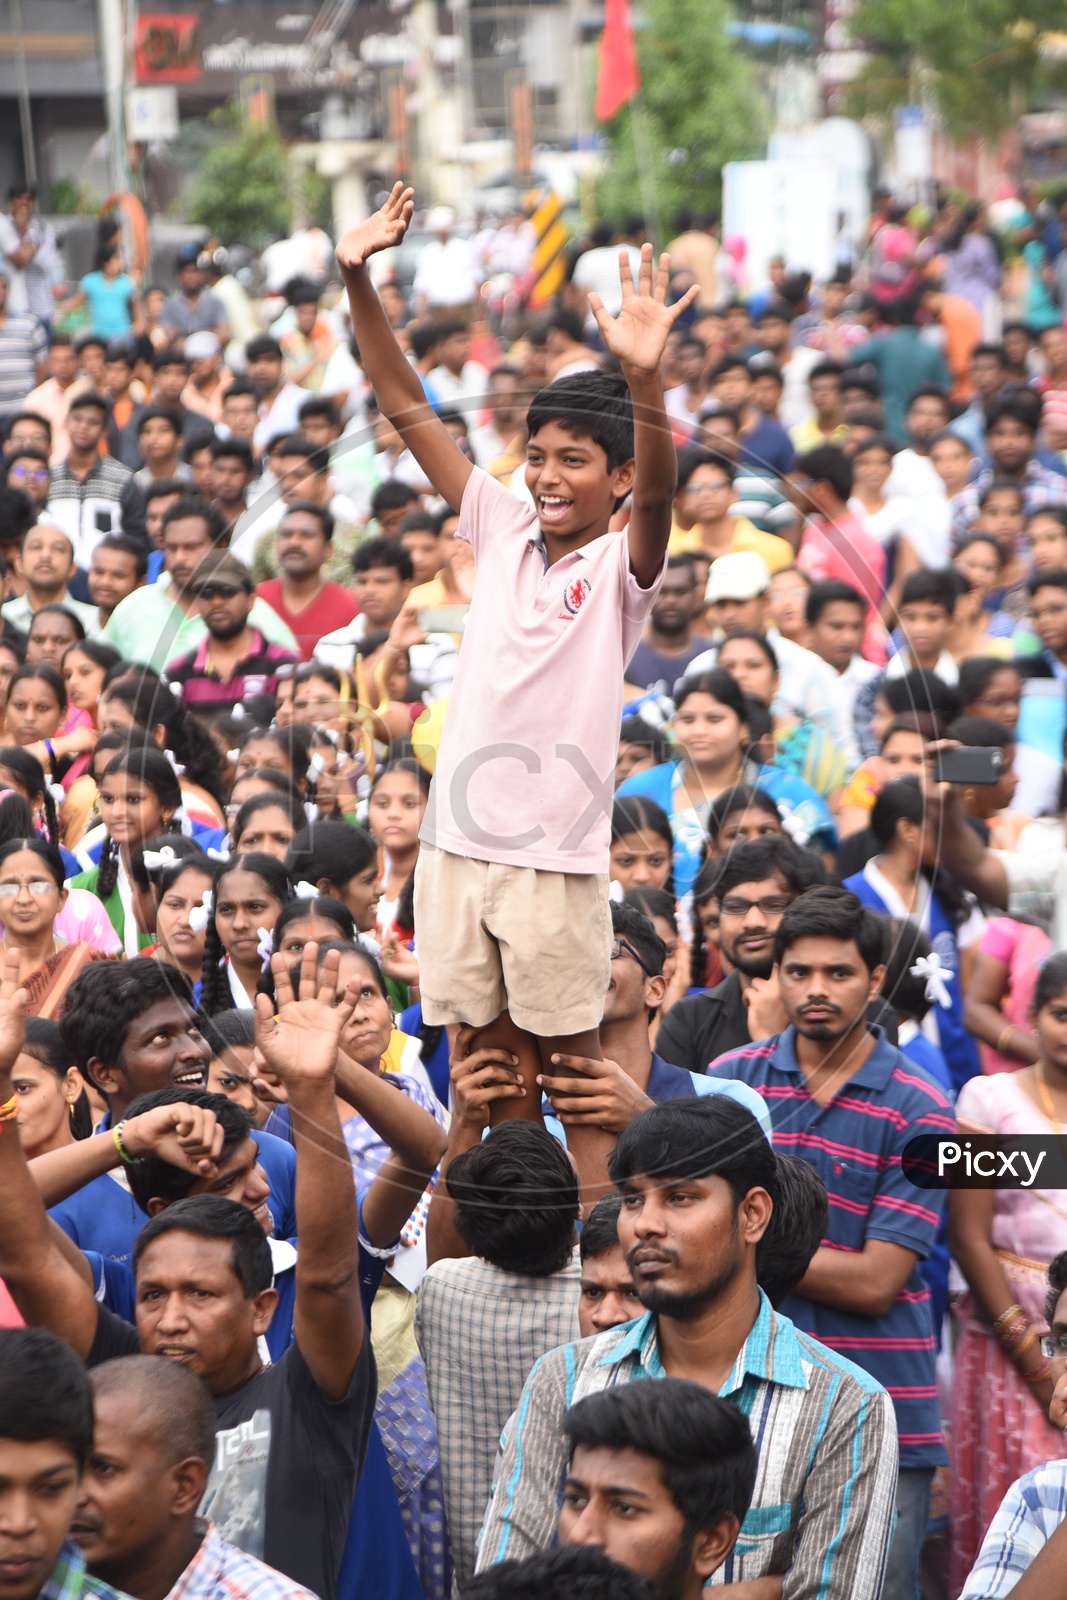 Crowd Cheering In an Event